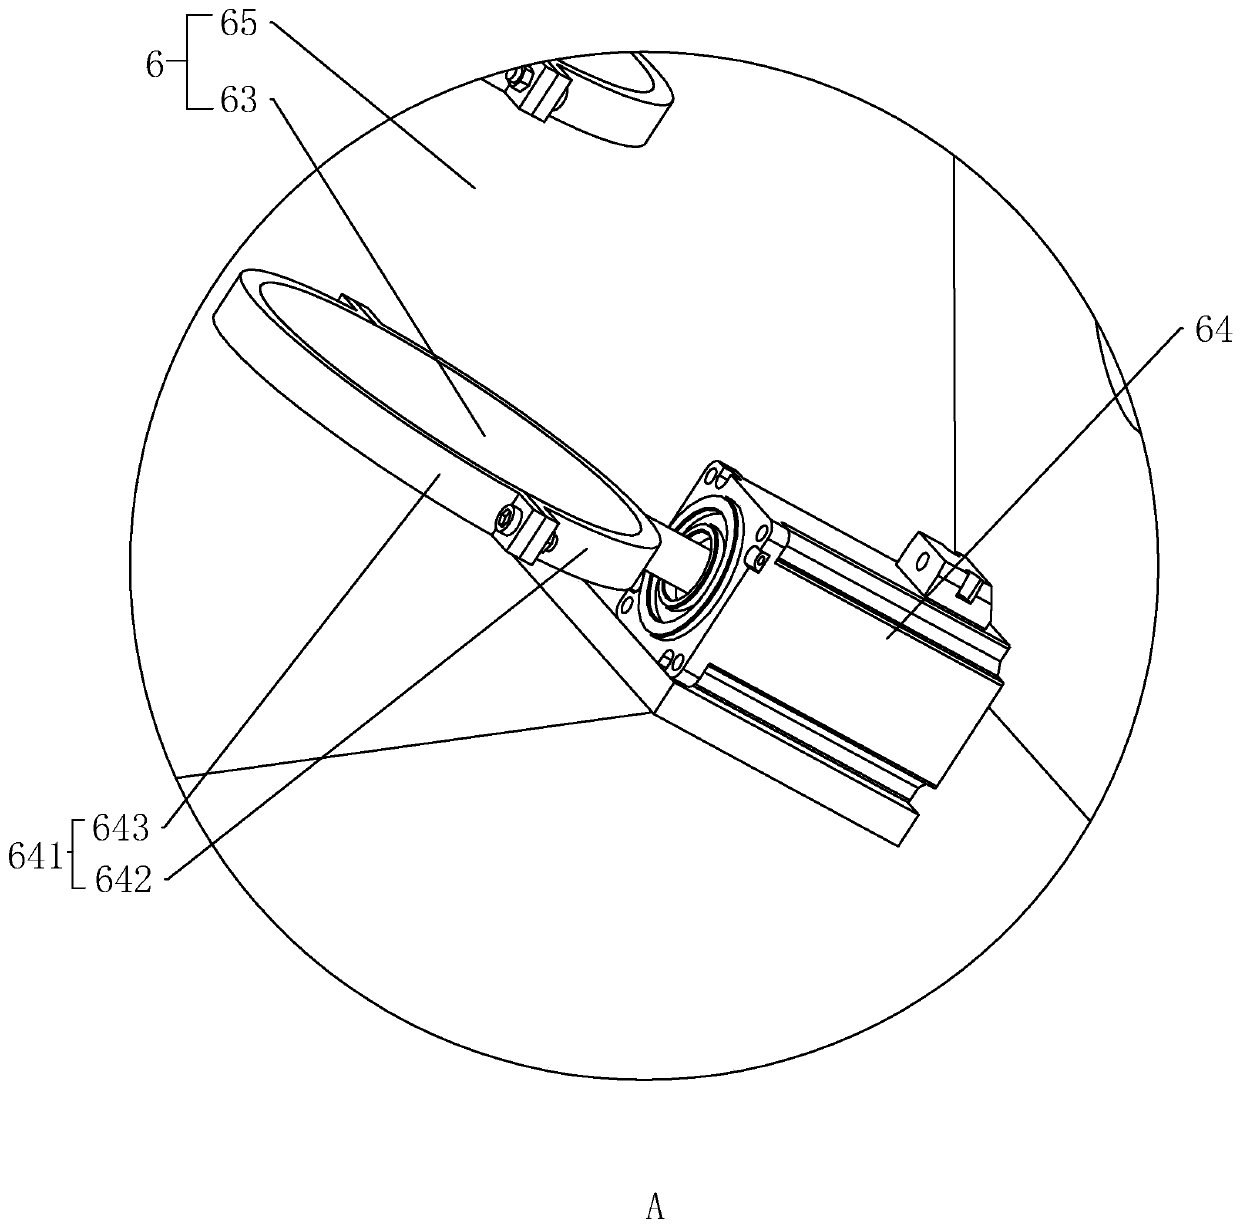 Optical system structure for laser processing